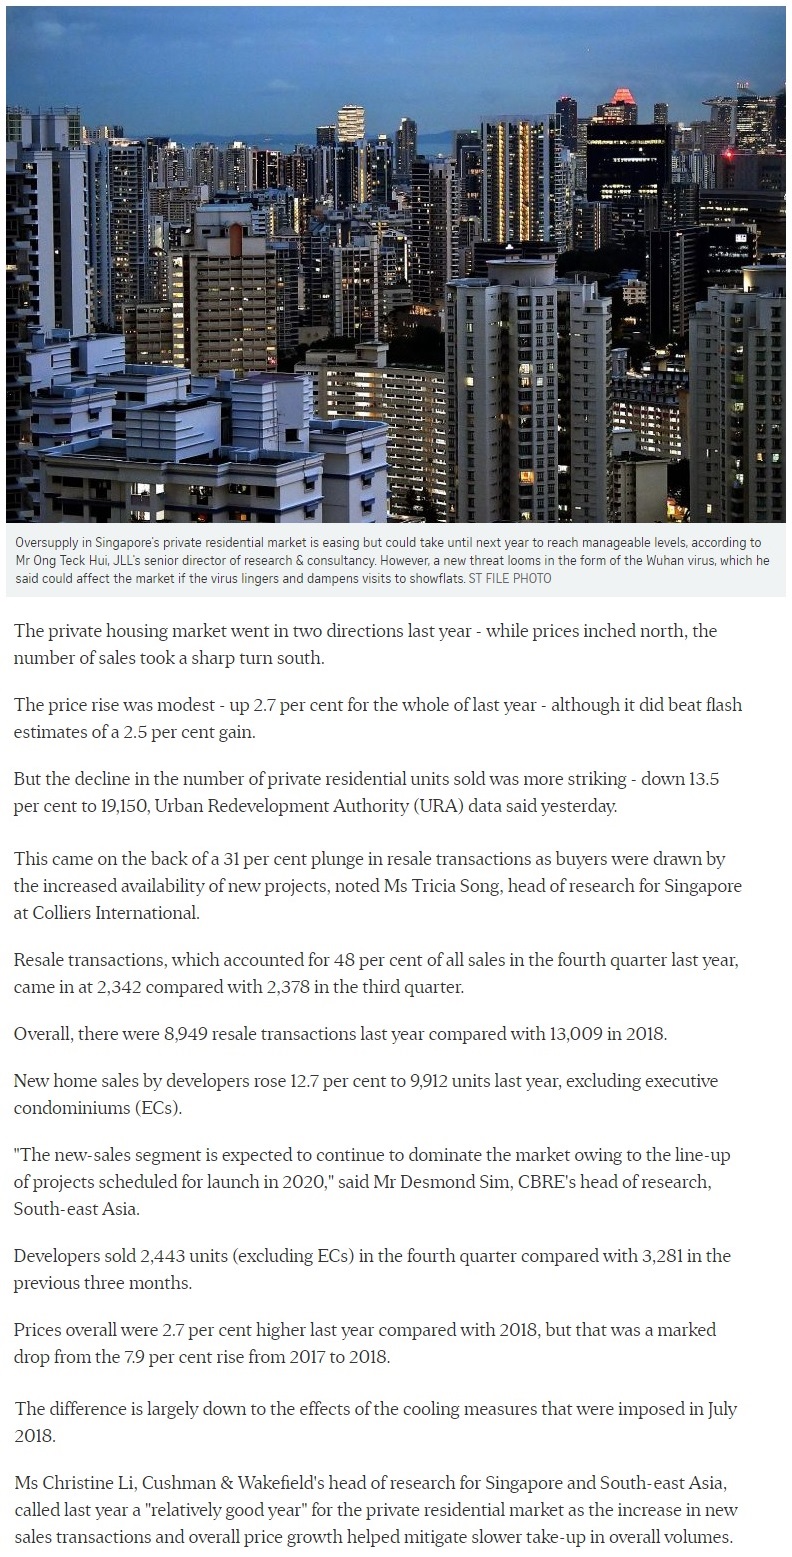 Midtown Bay - Singapore private home prices inch up 2.7% for 2019 Part 1